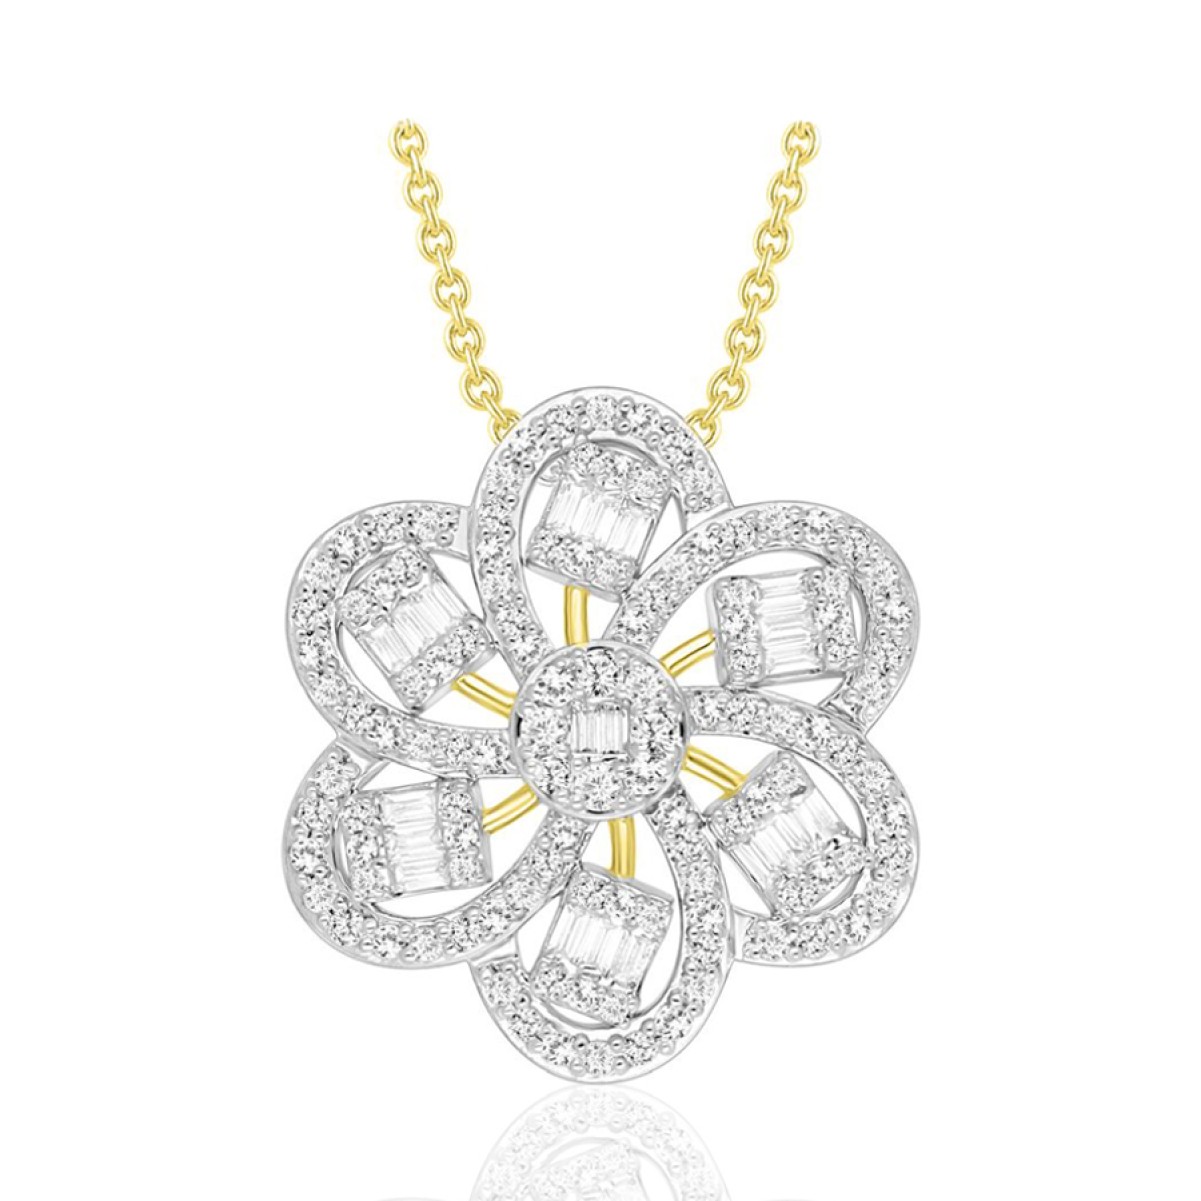 18K YELLOW GOLD 1CT ROUND/BAGUETTE DIAMOND LADIES PENDANT WITH CHAIN  